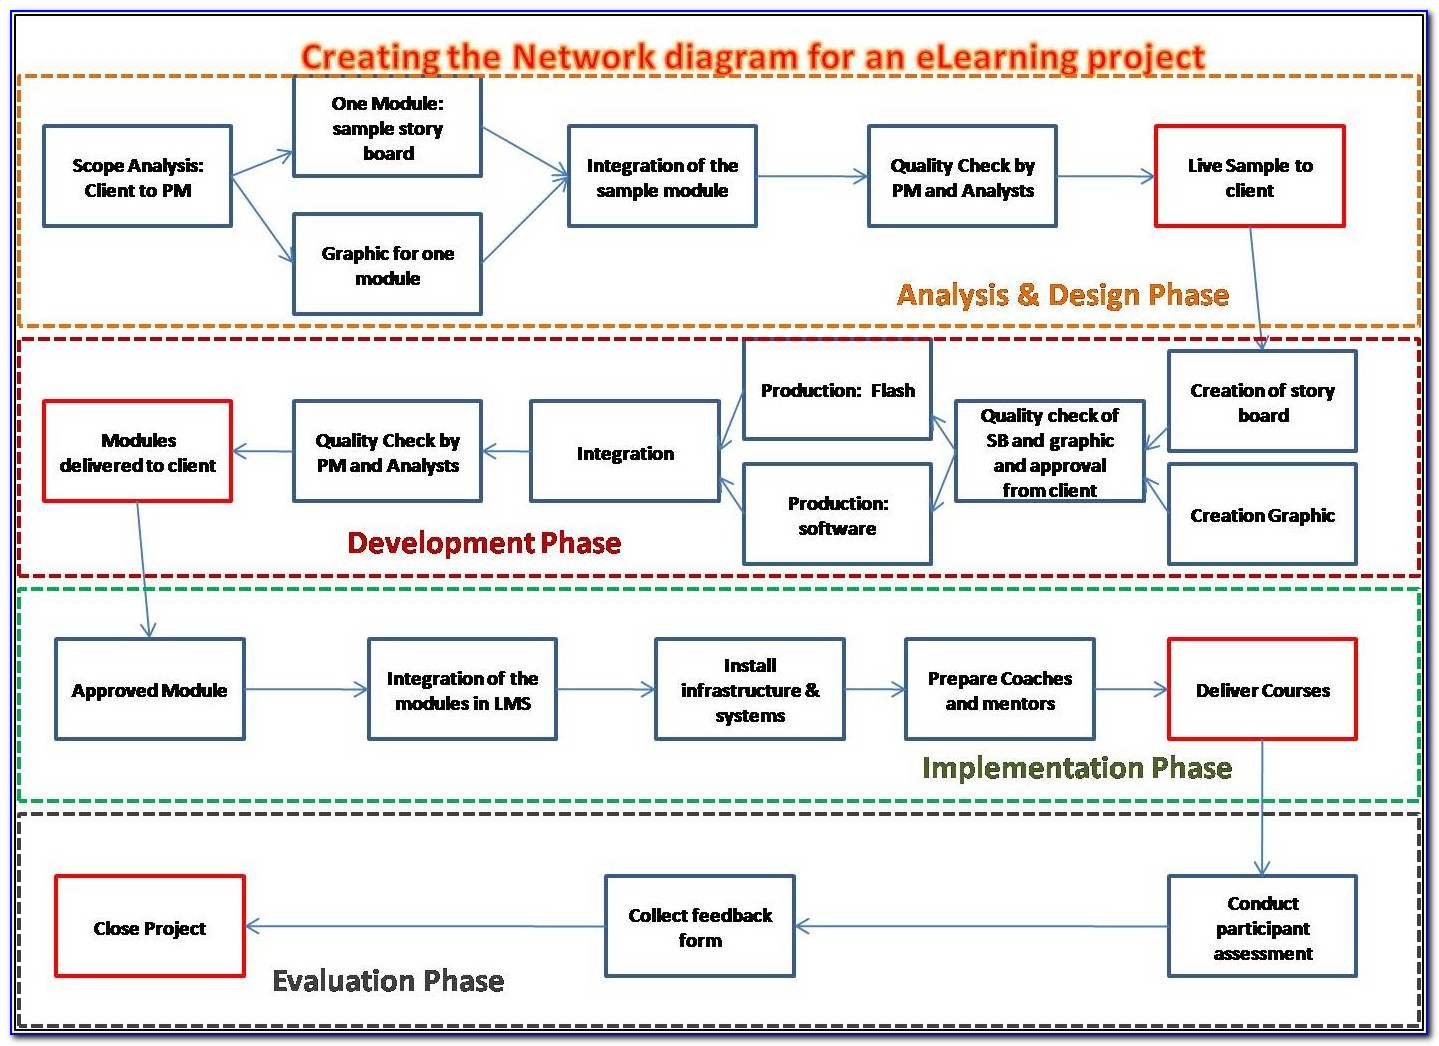 Project Schedule Network Diagram Template